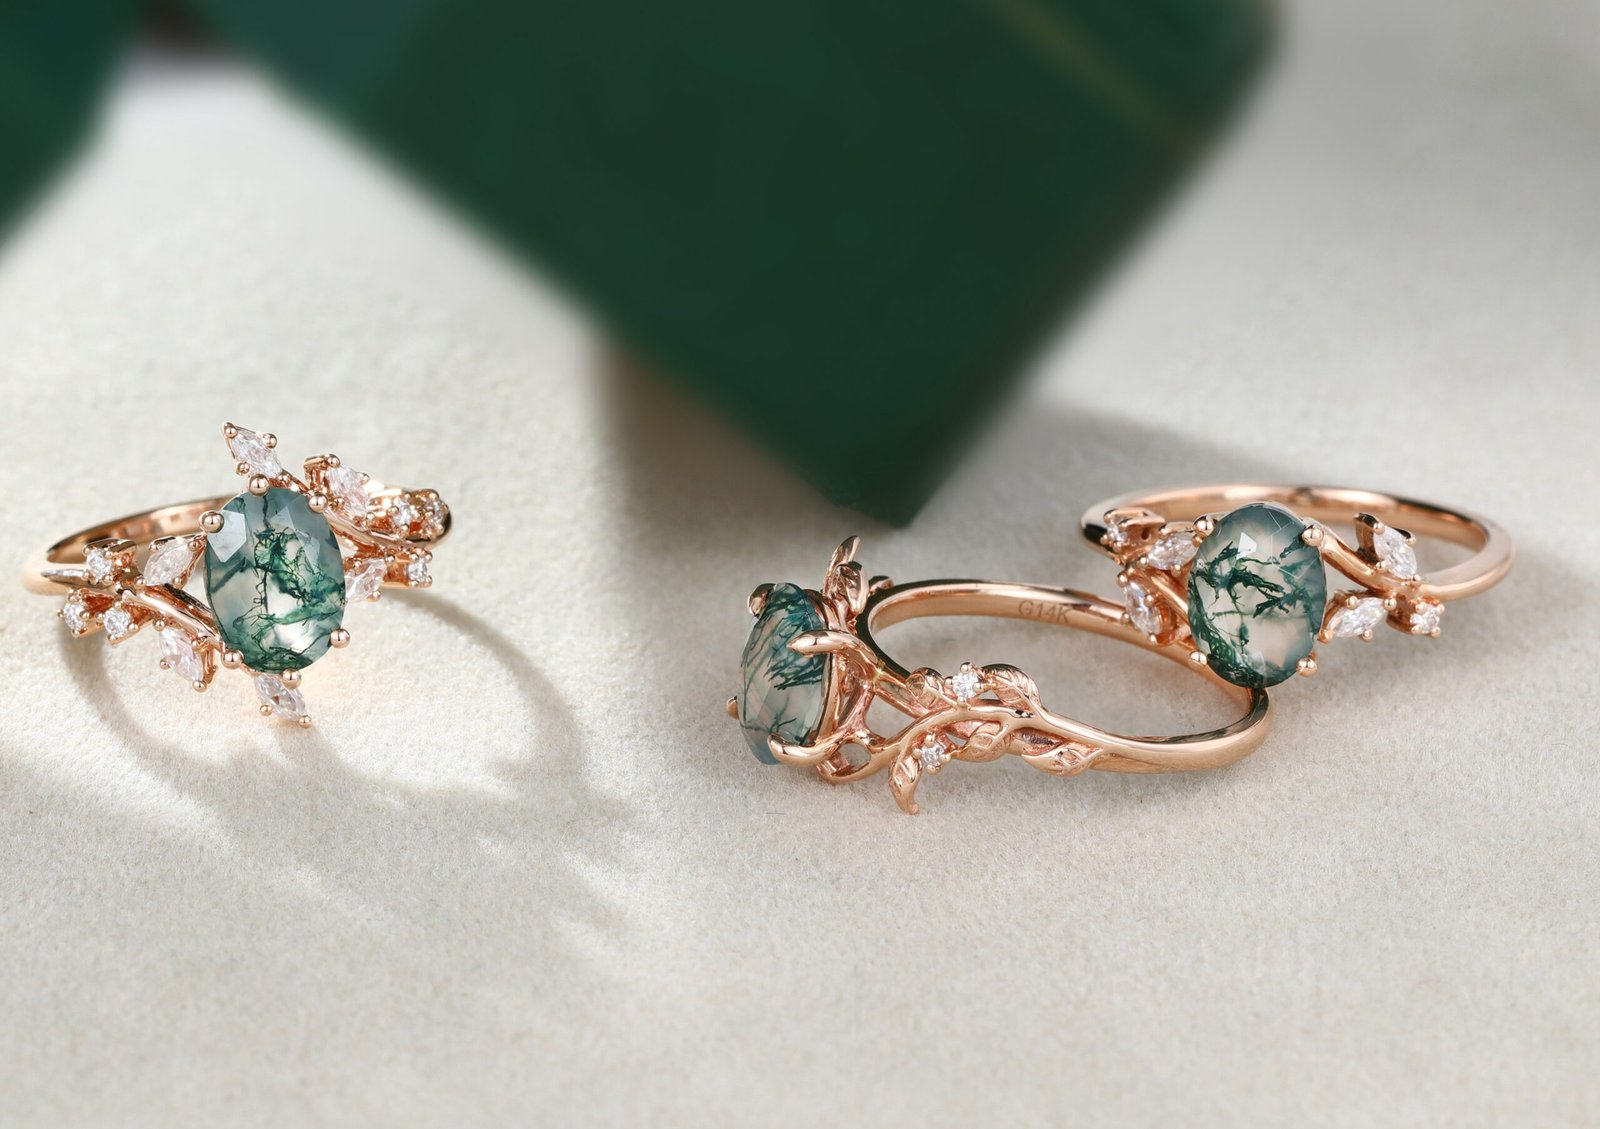 Nature-inspired designs are a popular trend in moss agate engagement rings.